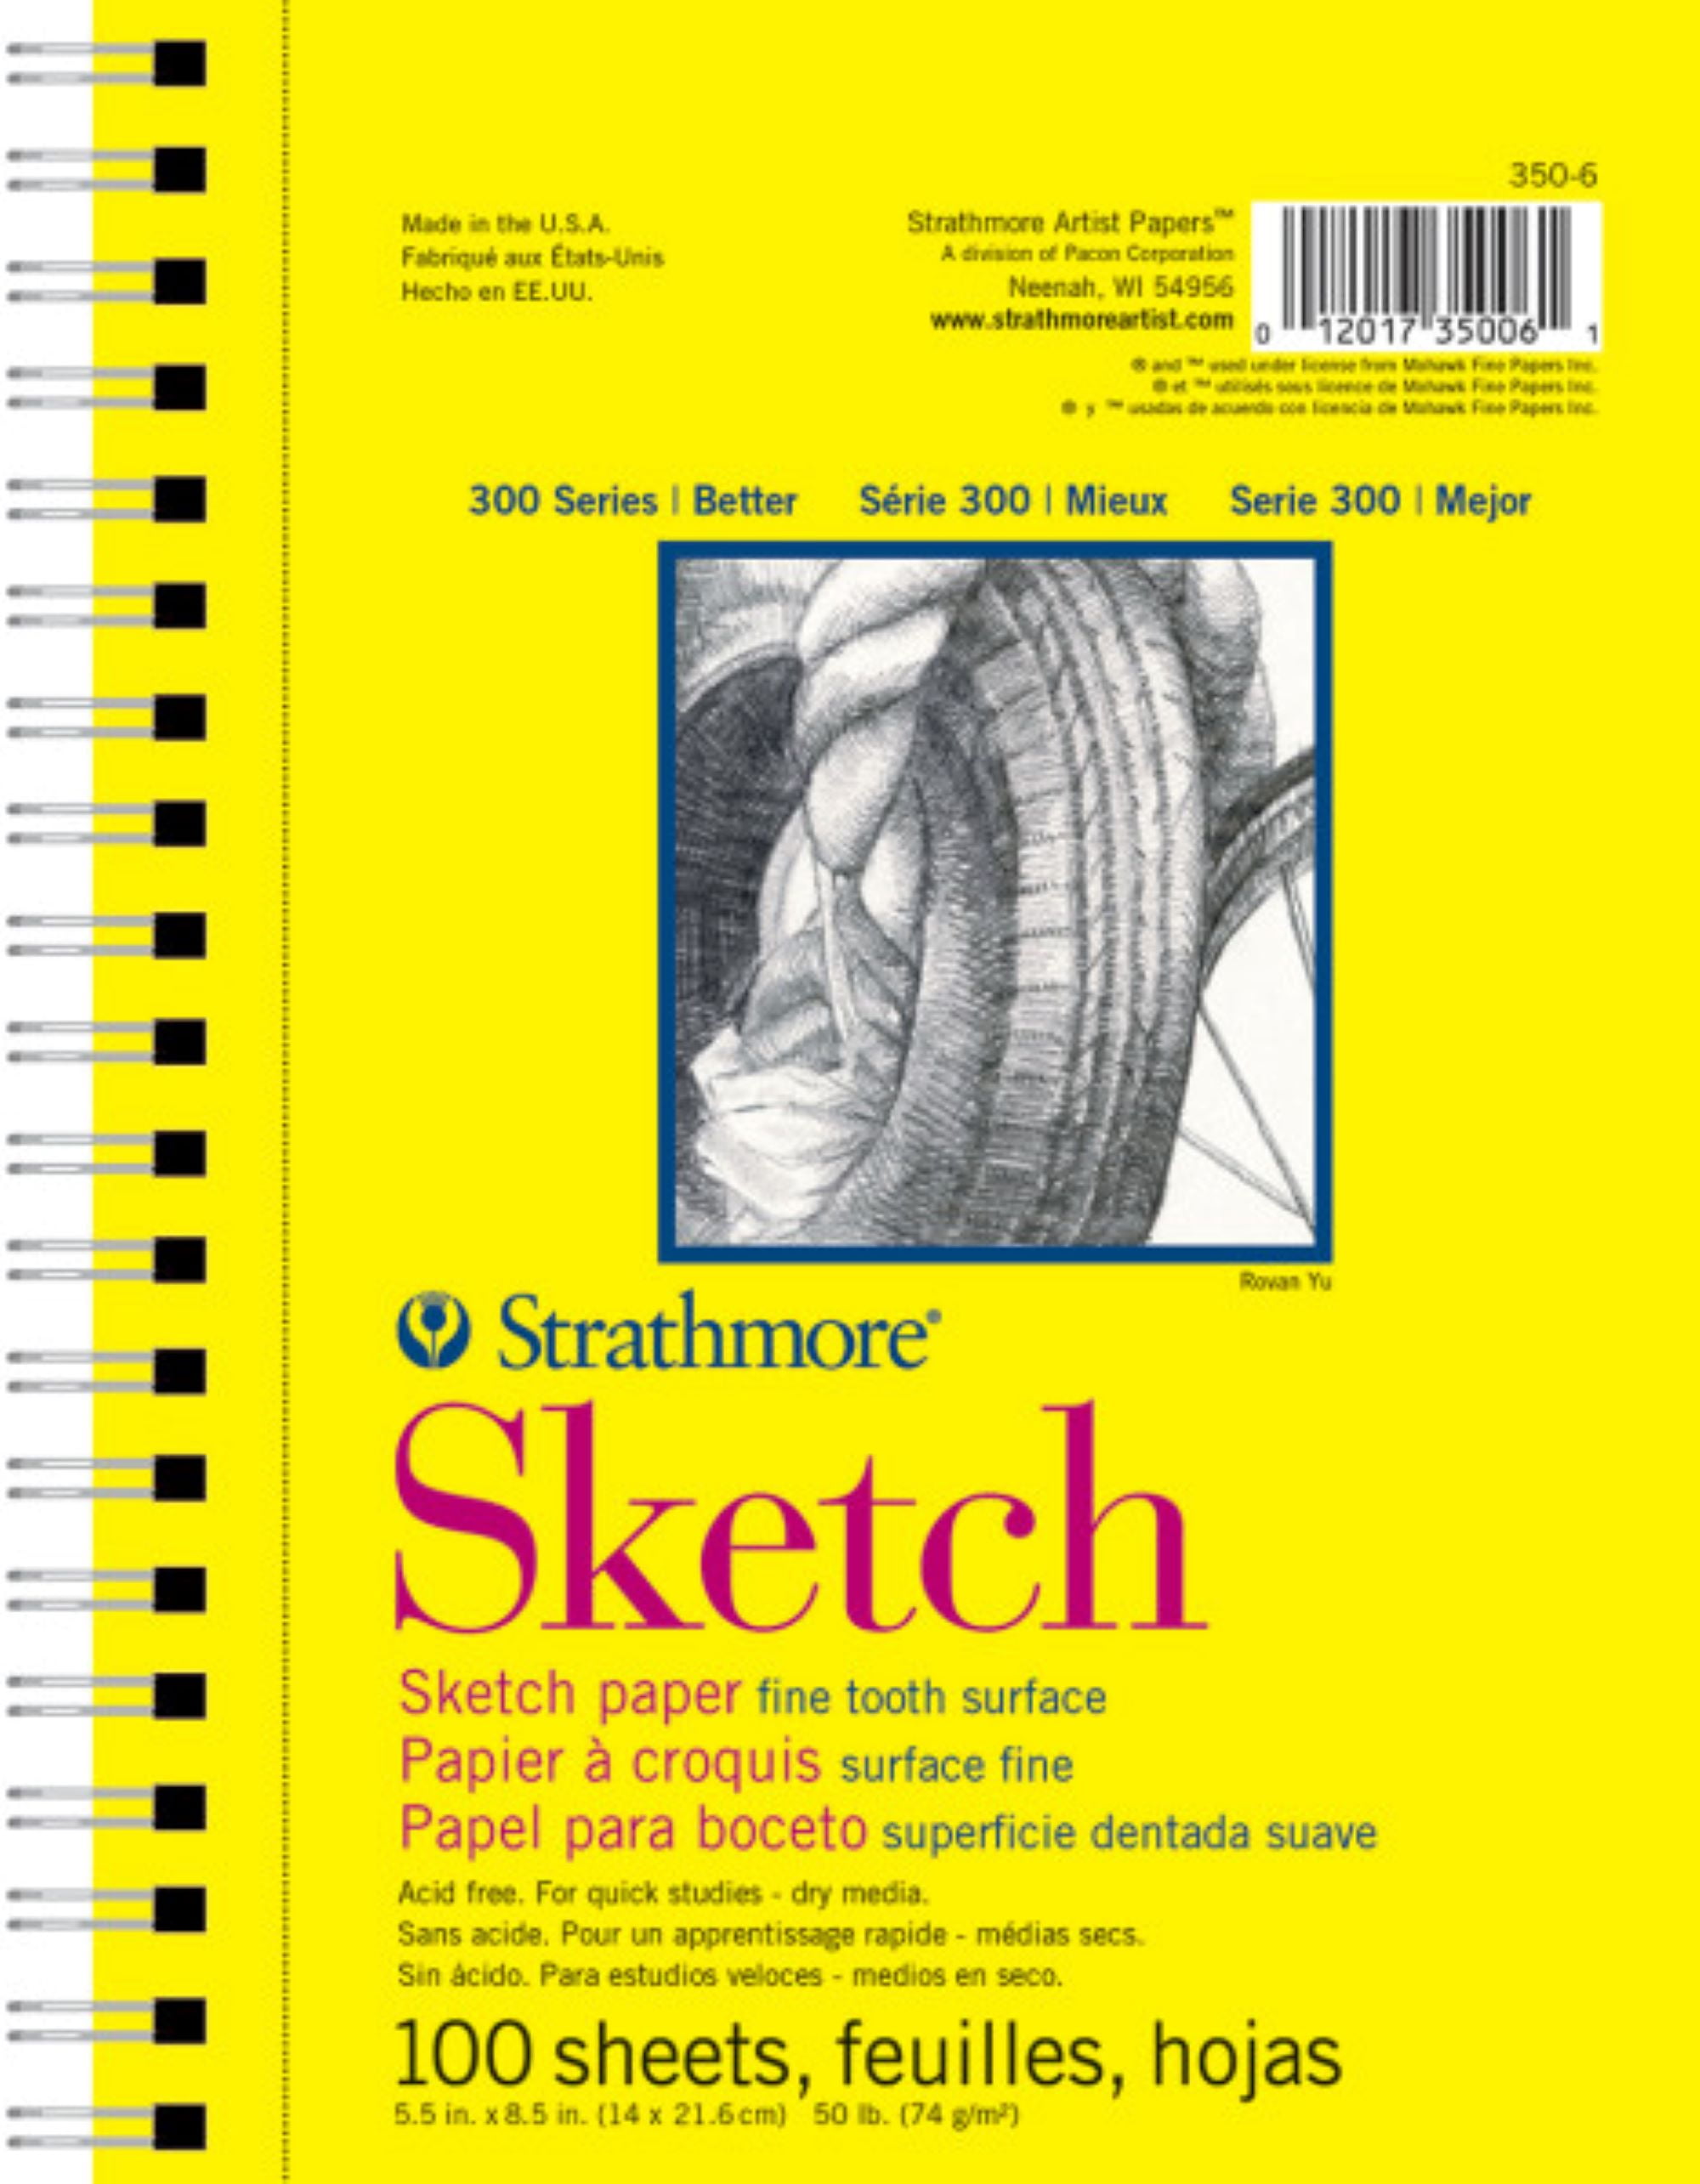 32 Sheets Pro-Art Strathmore Charcoal Spiral Paper Pad 9-inch x 12-inch